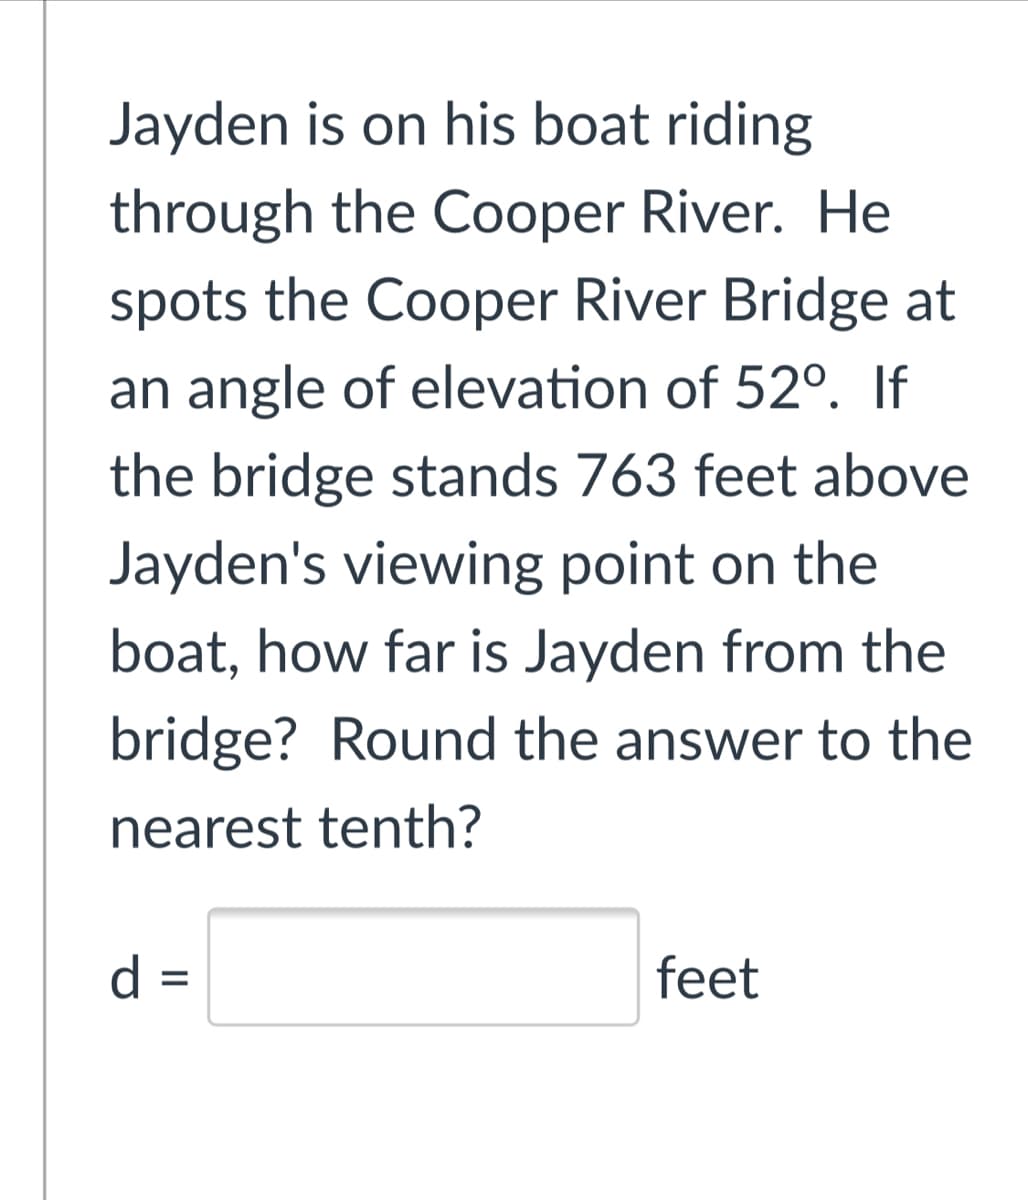 Jayden is on his boat riding
through the Cooper River. He
spots the Cooper River Bridge at
an angle of elevation of 52°. If
the bridge stands 763 feet above
Jayden's viewing point on the
boat, how far is Jayden from the
bridge? Round the answer to the
nearest tenth?
d =
feet
